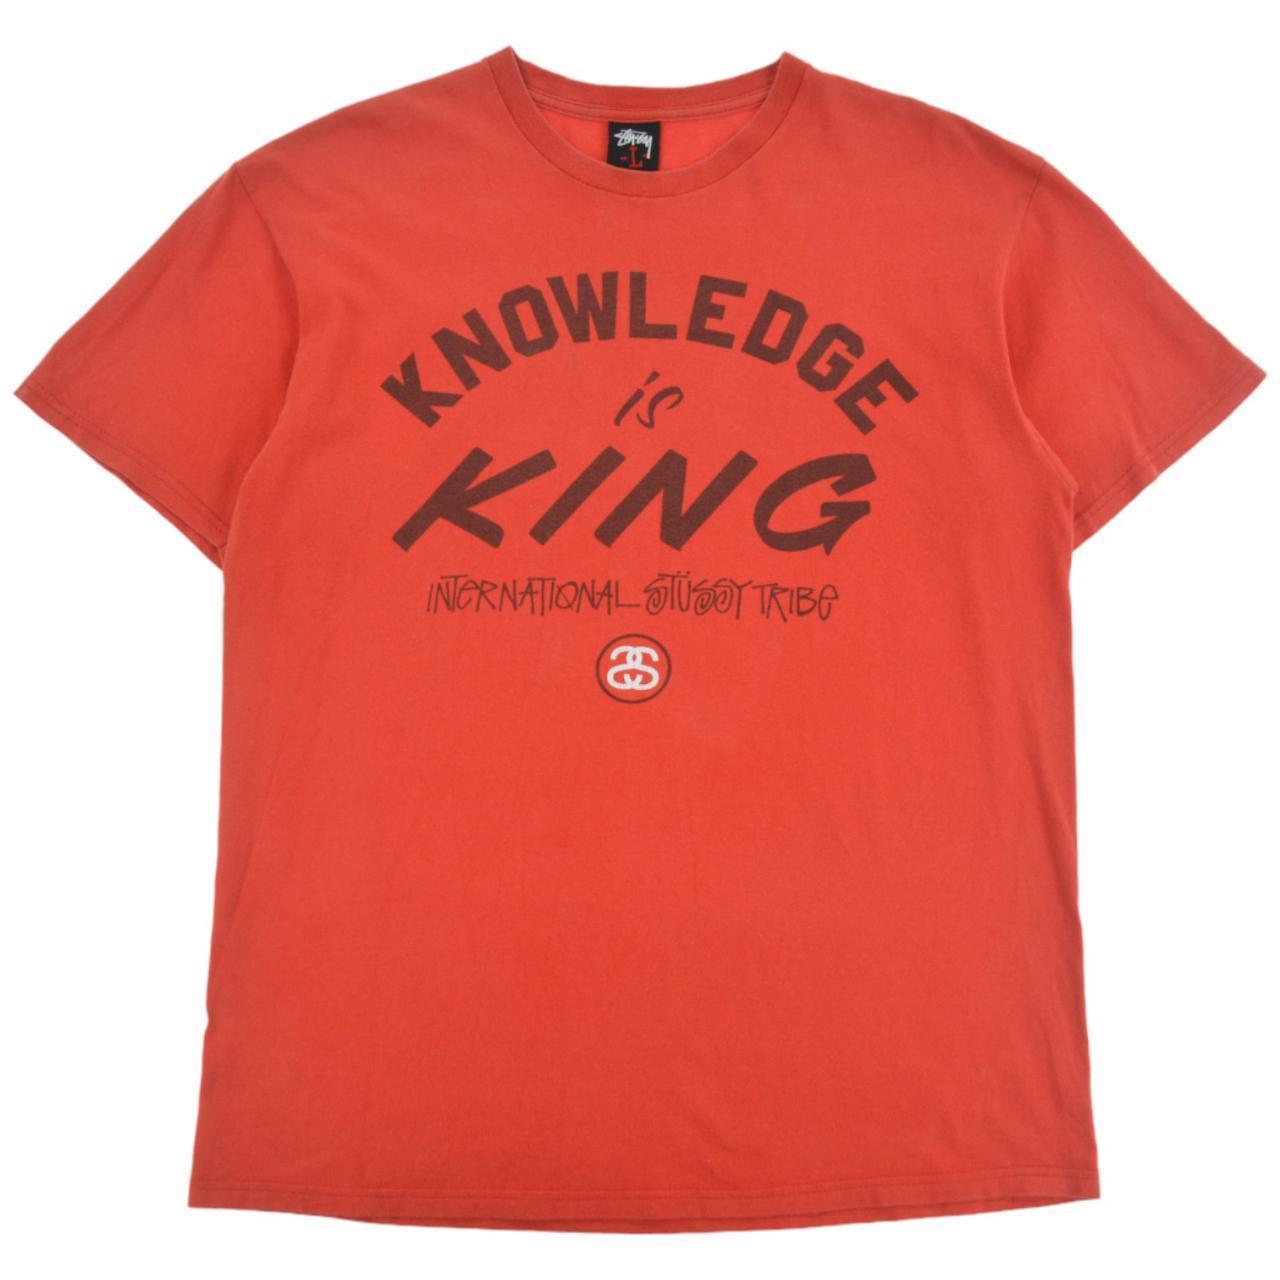 Vintage Stussy Knowledge Is King T Shirt Size L - Known Source